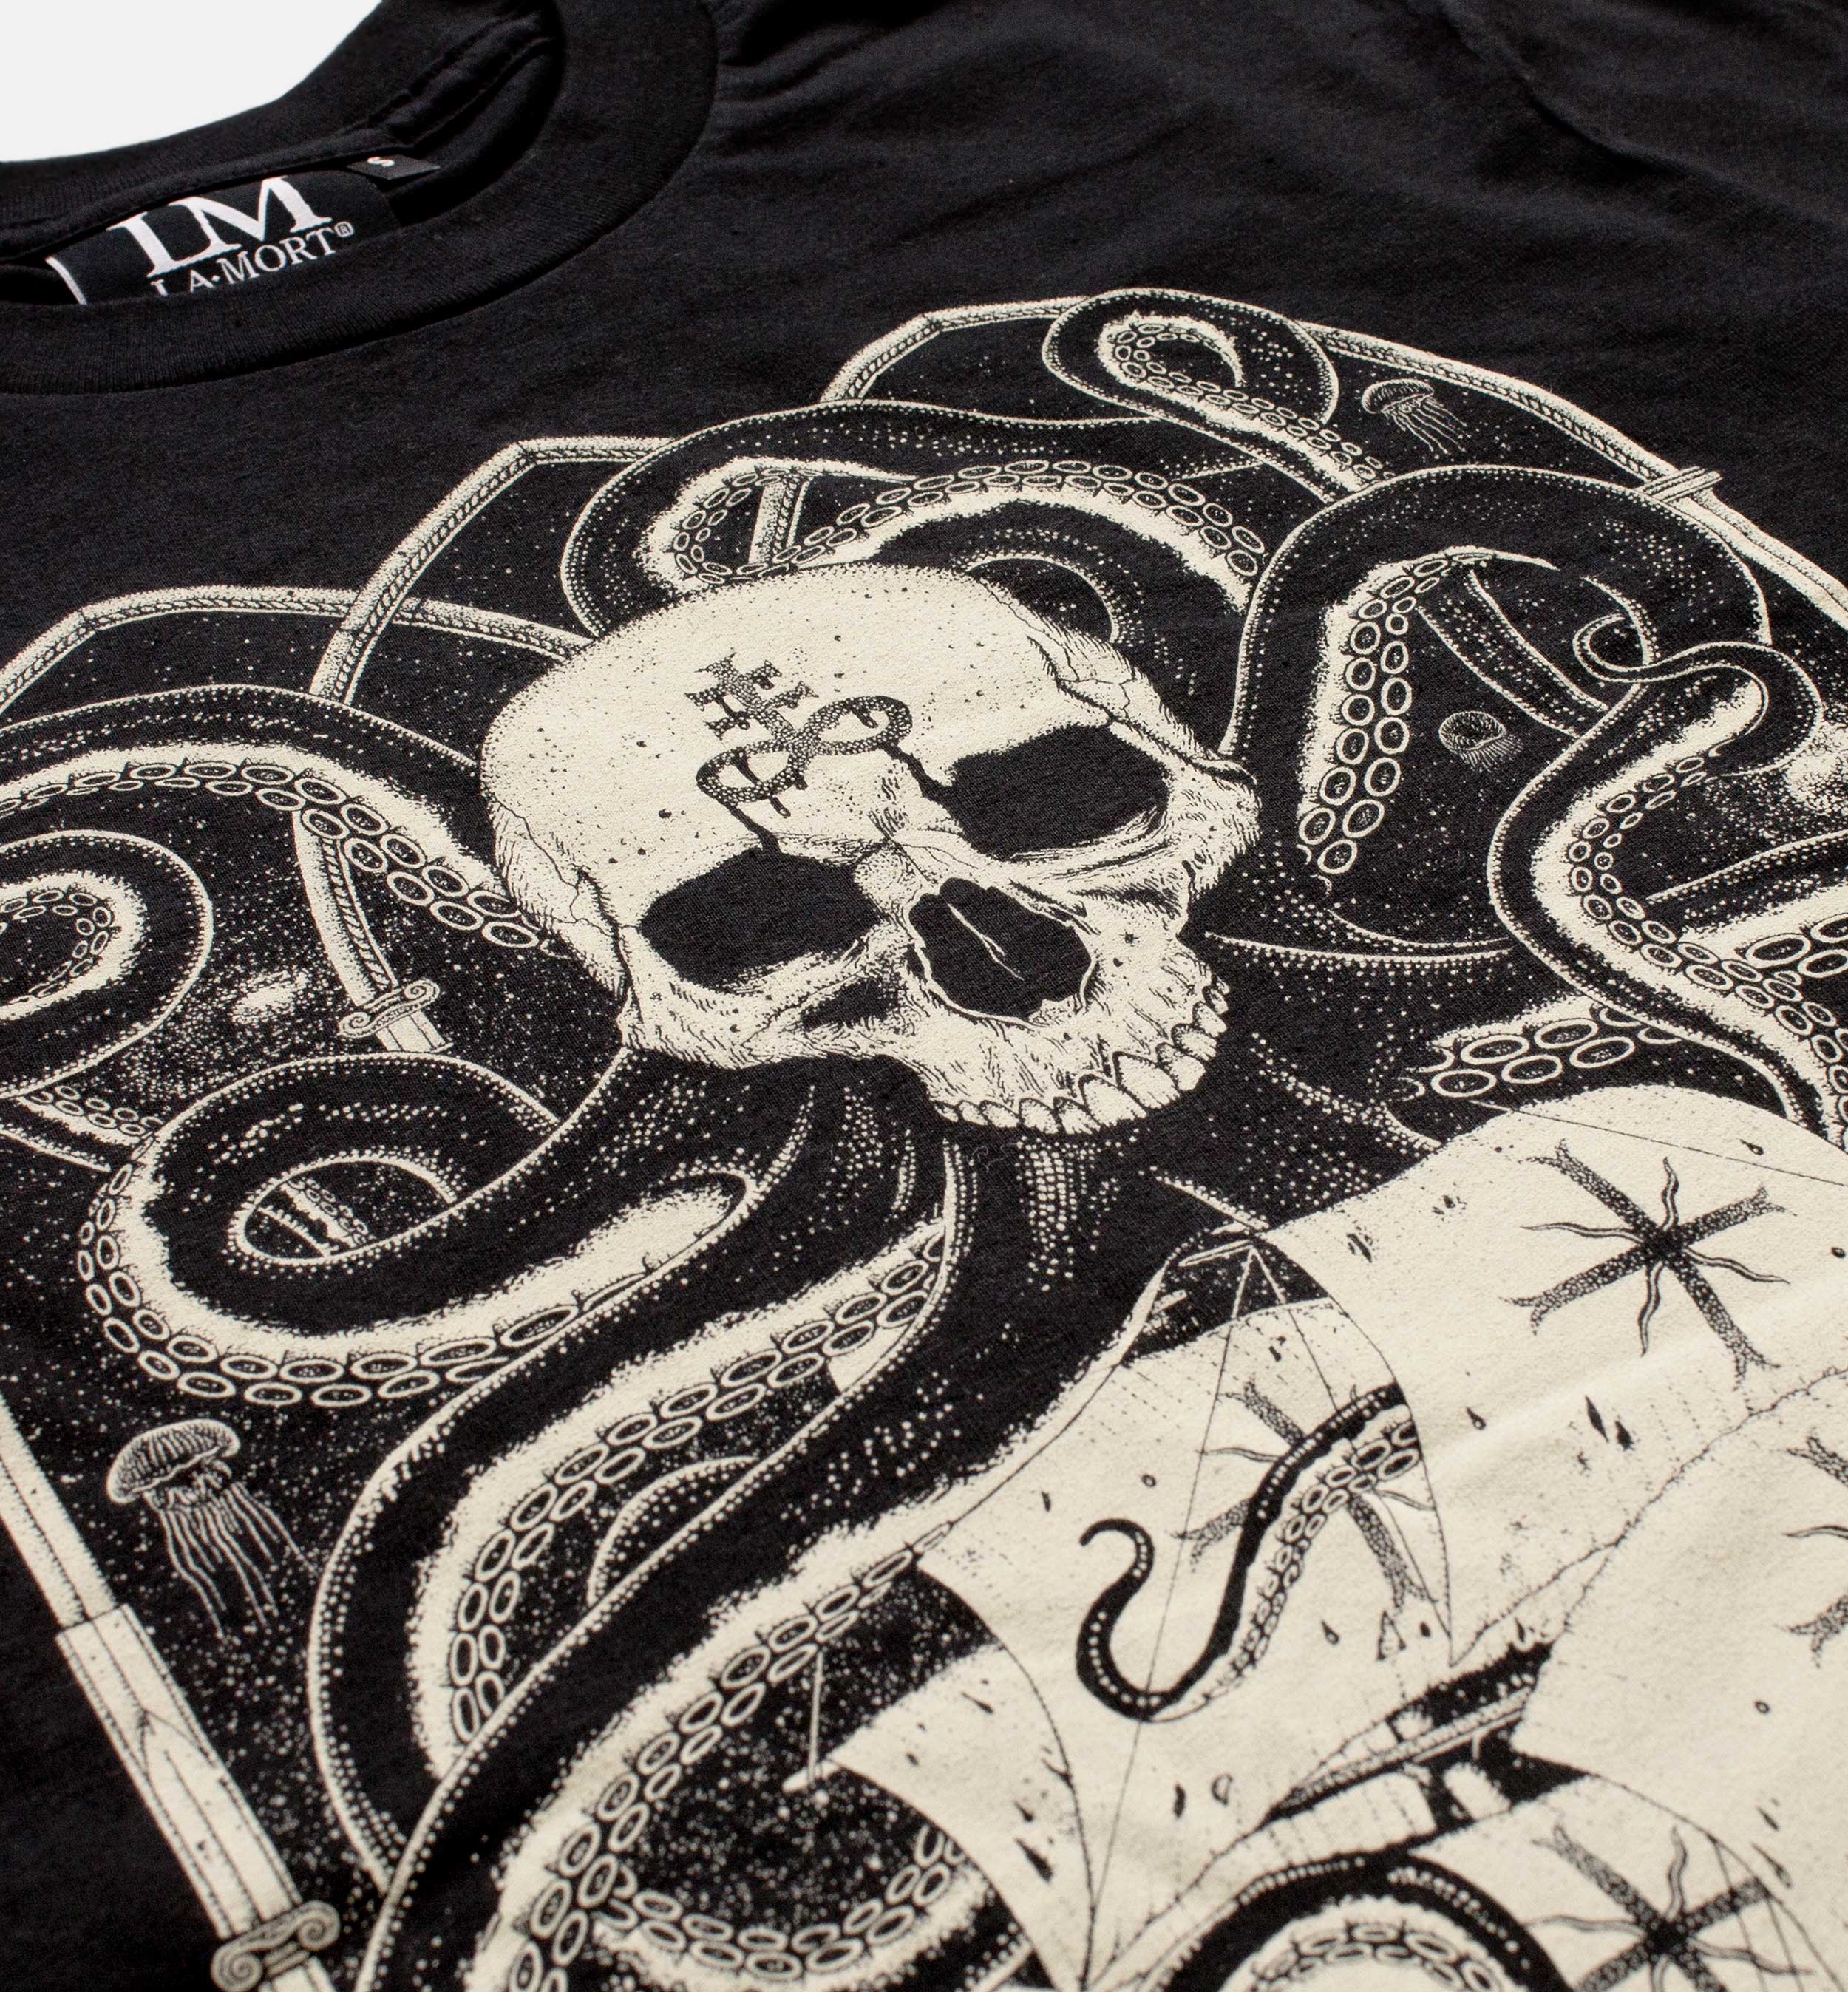 Unrequited Occult Tattoo T-shirt by La Mort Clothing